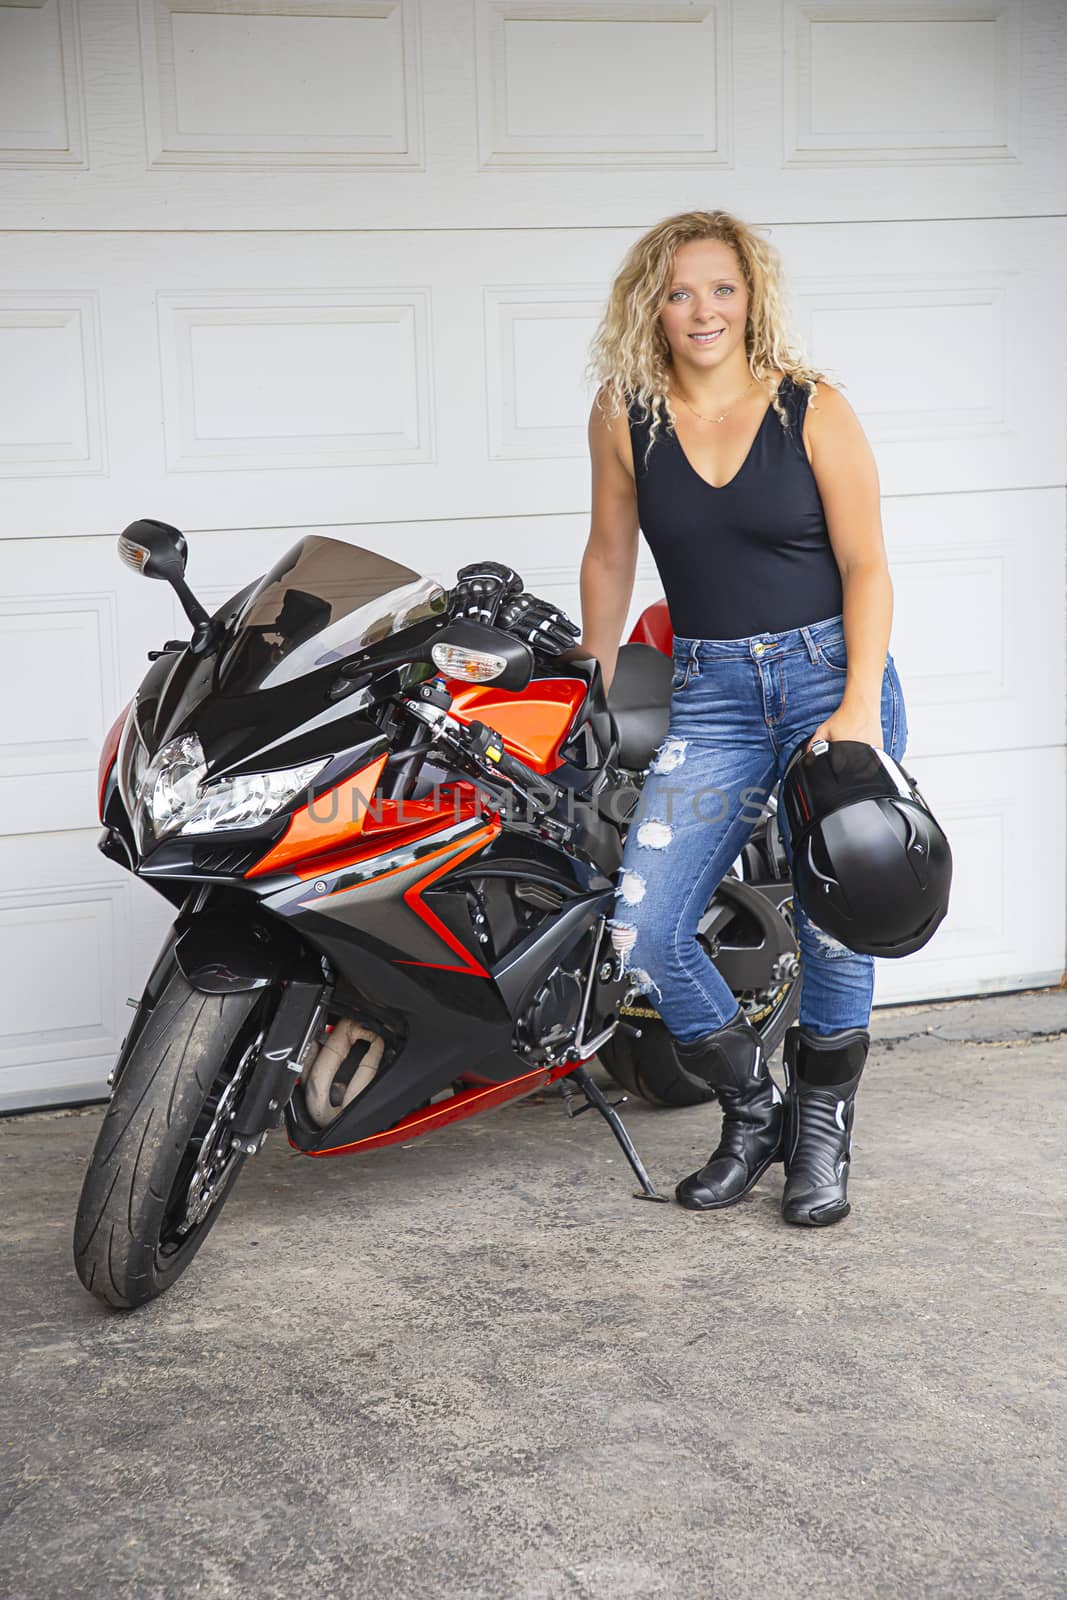 twenty something woman, leaning on a sport motocycle, standing in front of a garage door